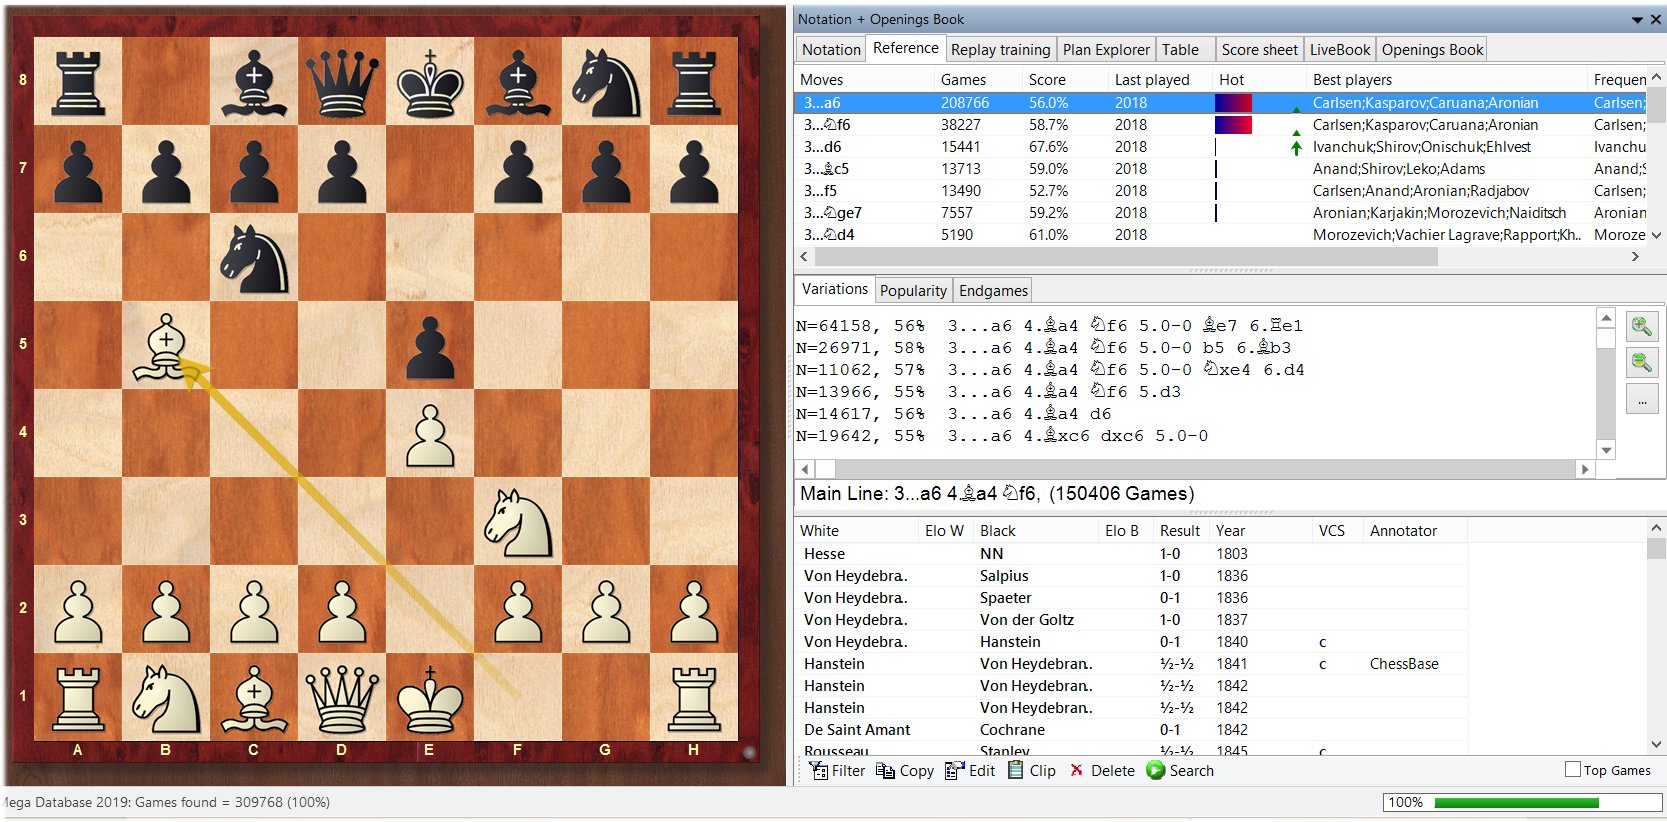 ChessBase 16.40 Crack with Activation Key Free Download